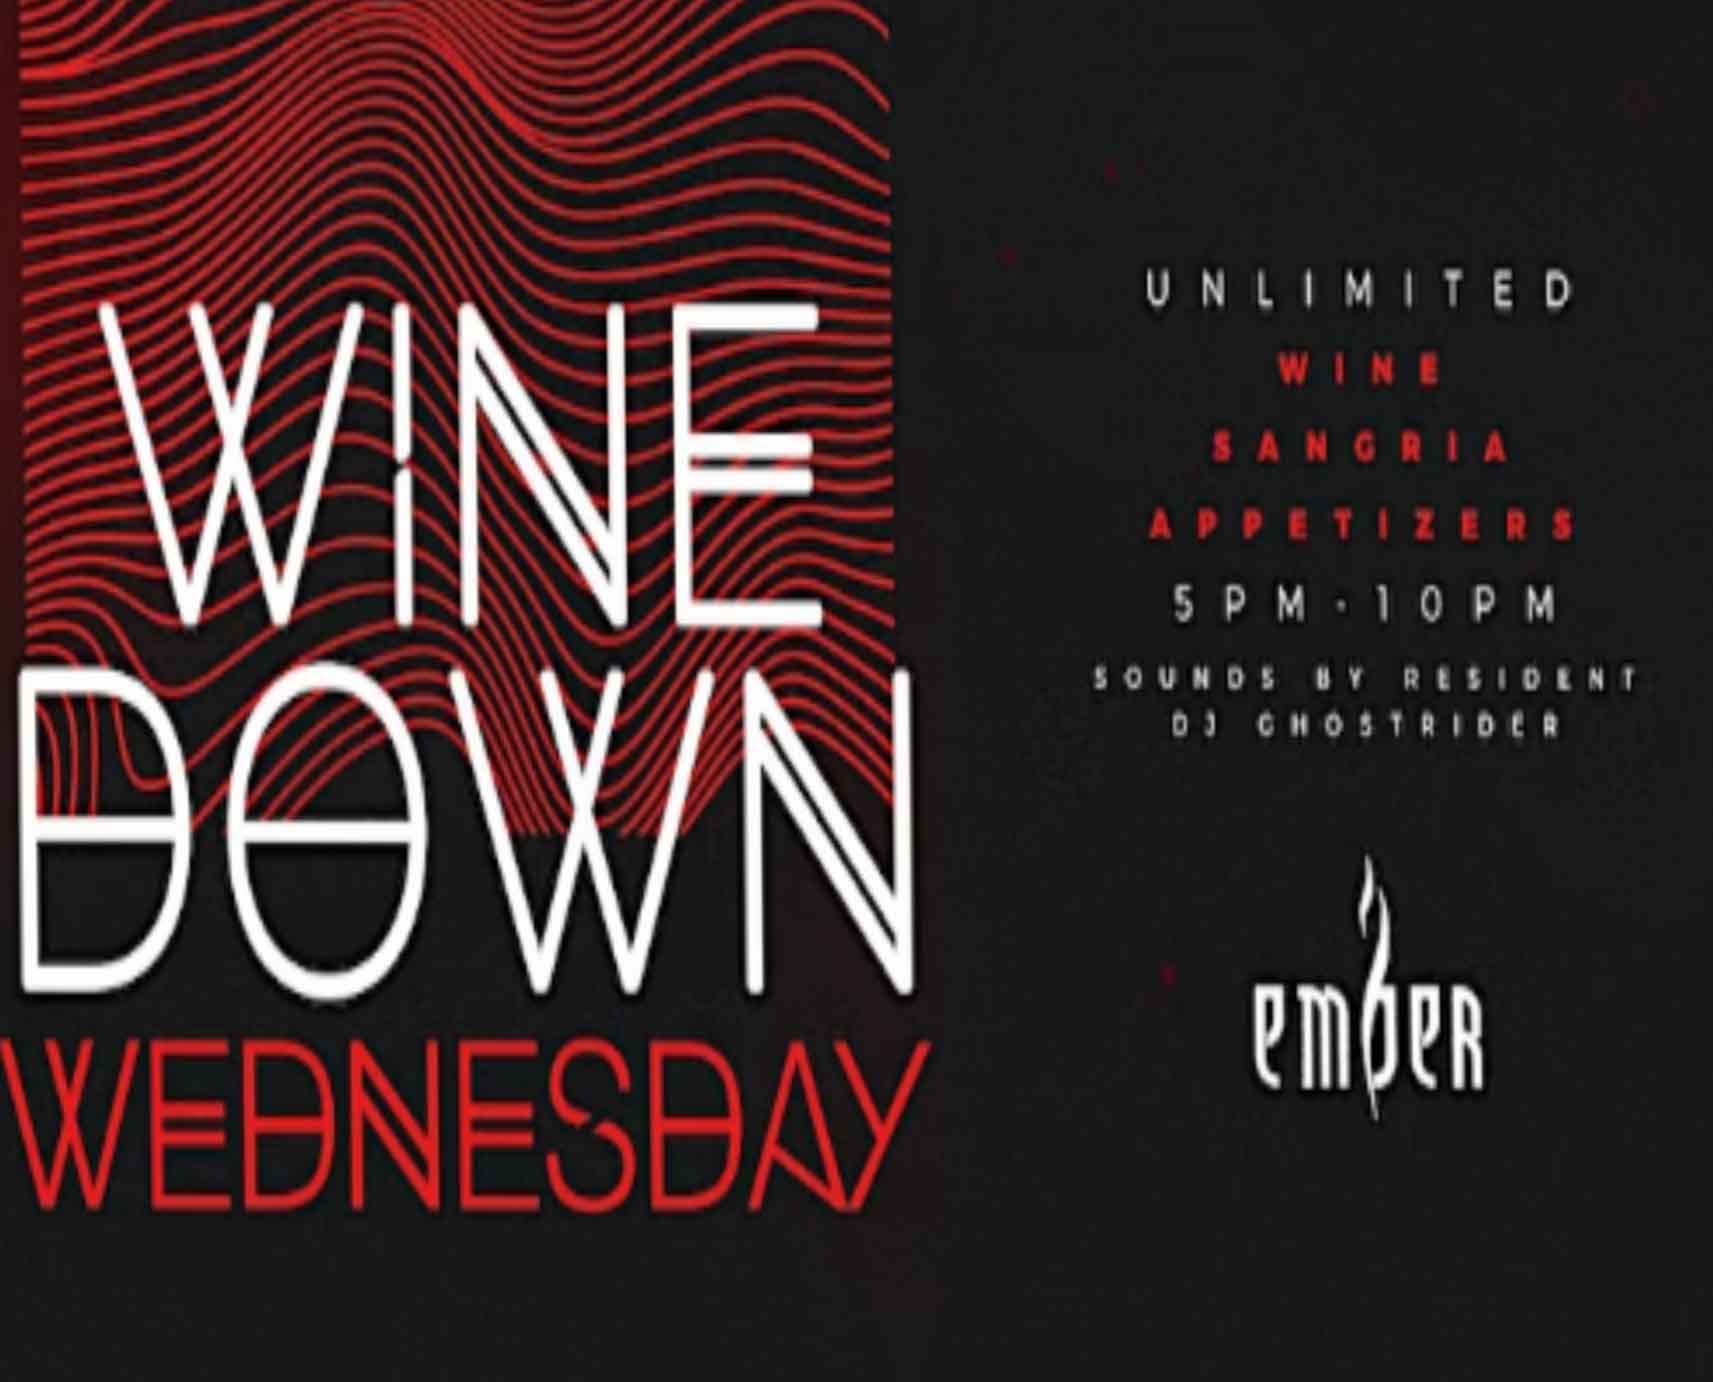 Wine Down Wednesday at Ember